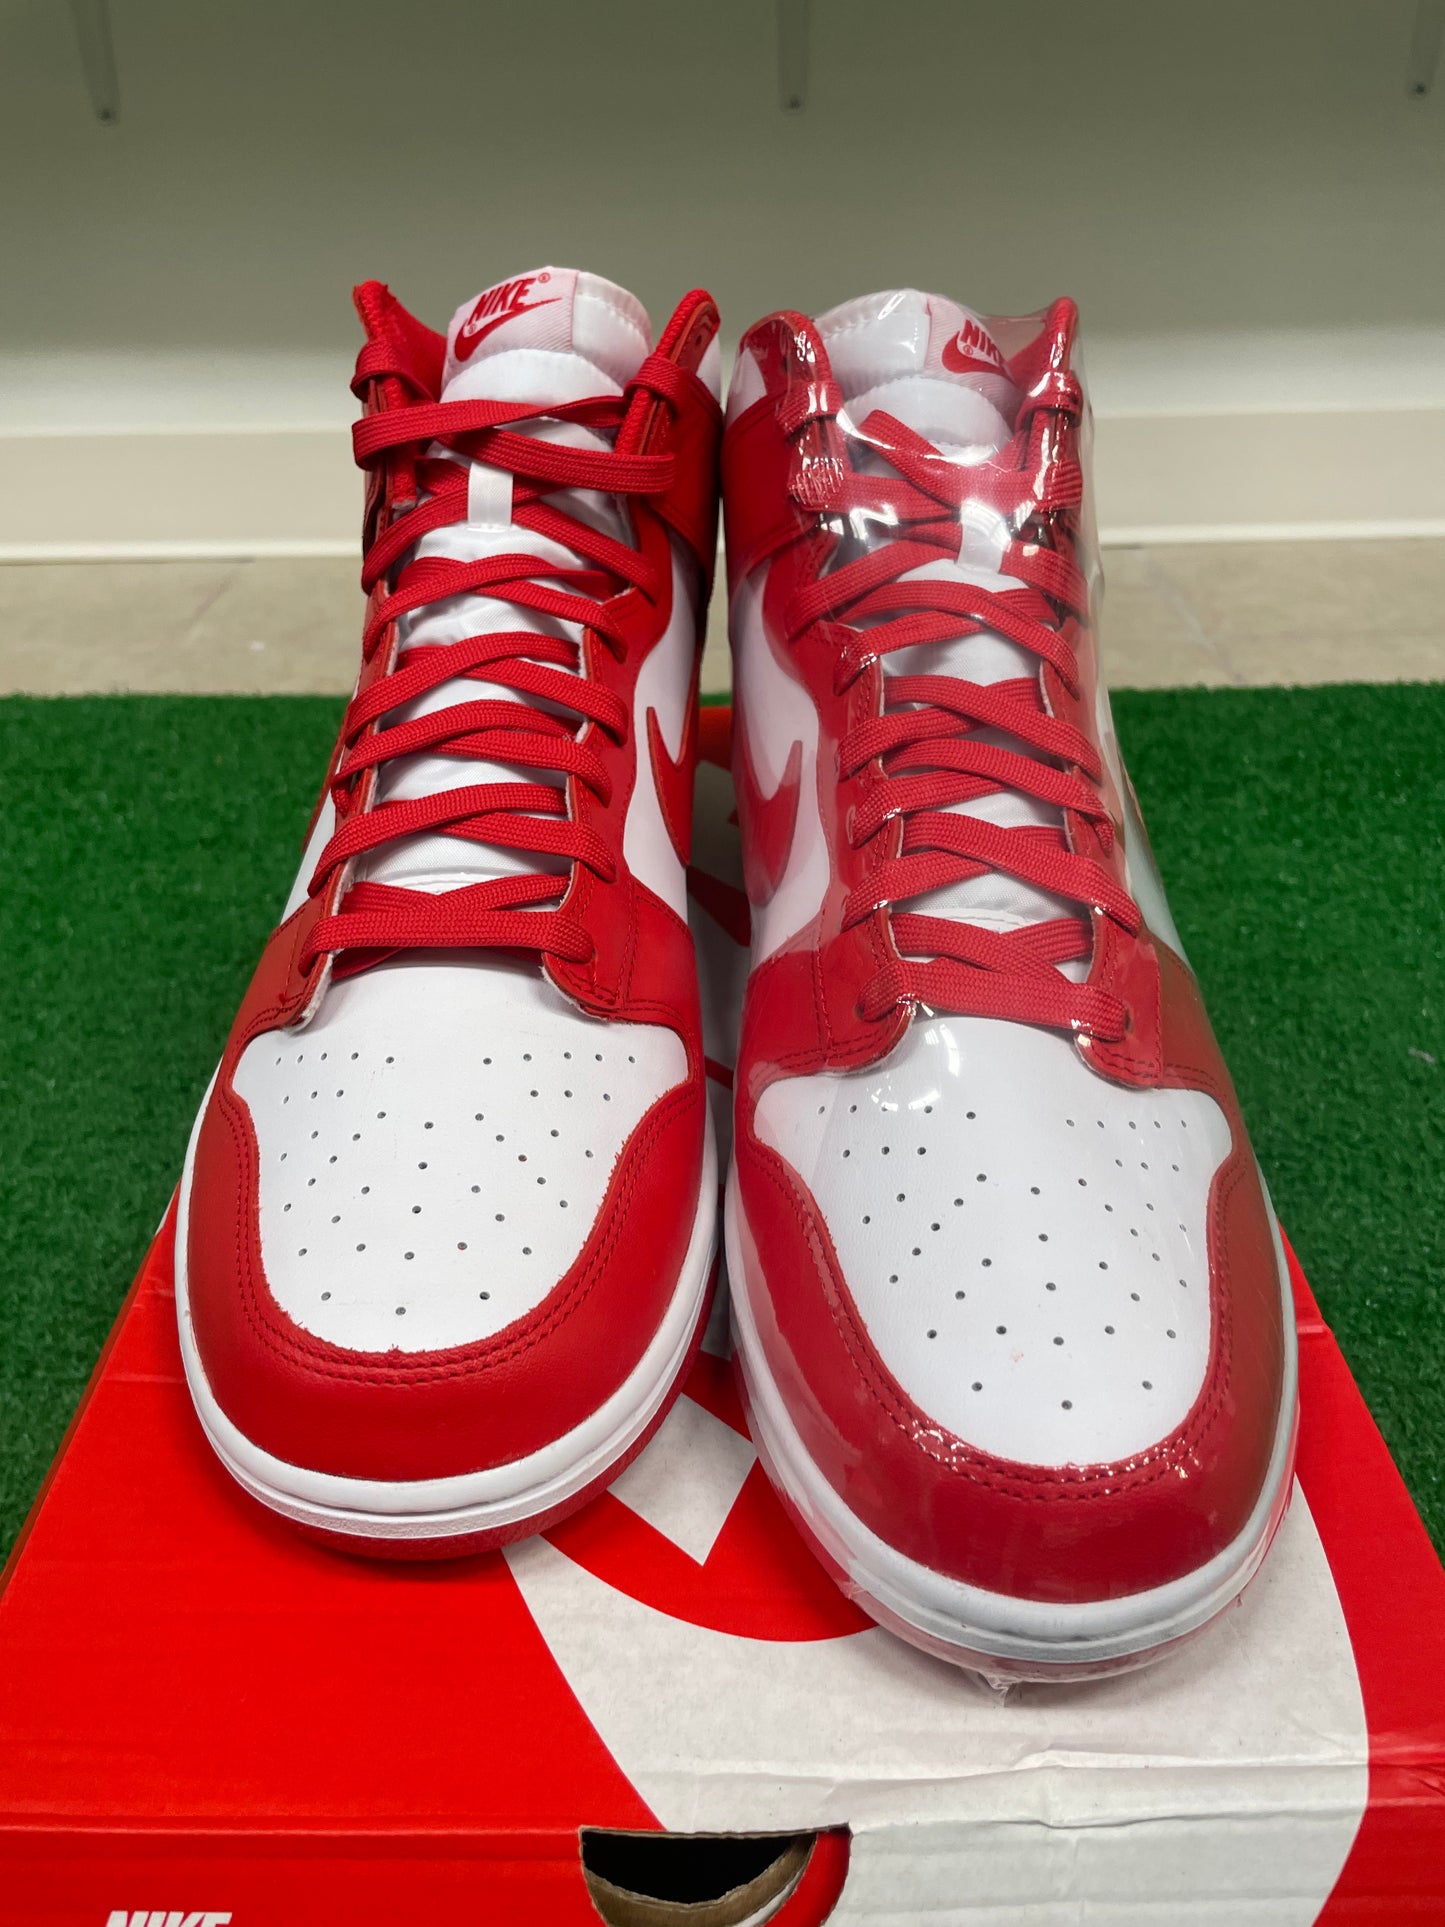 Mens Nike dunk high championship red shoe new with box